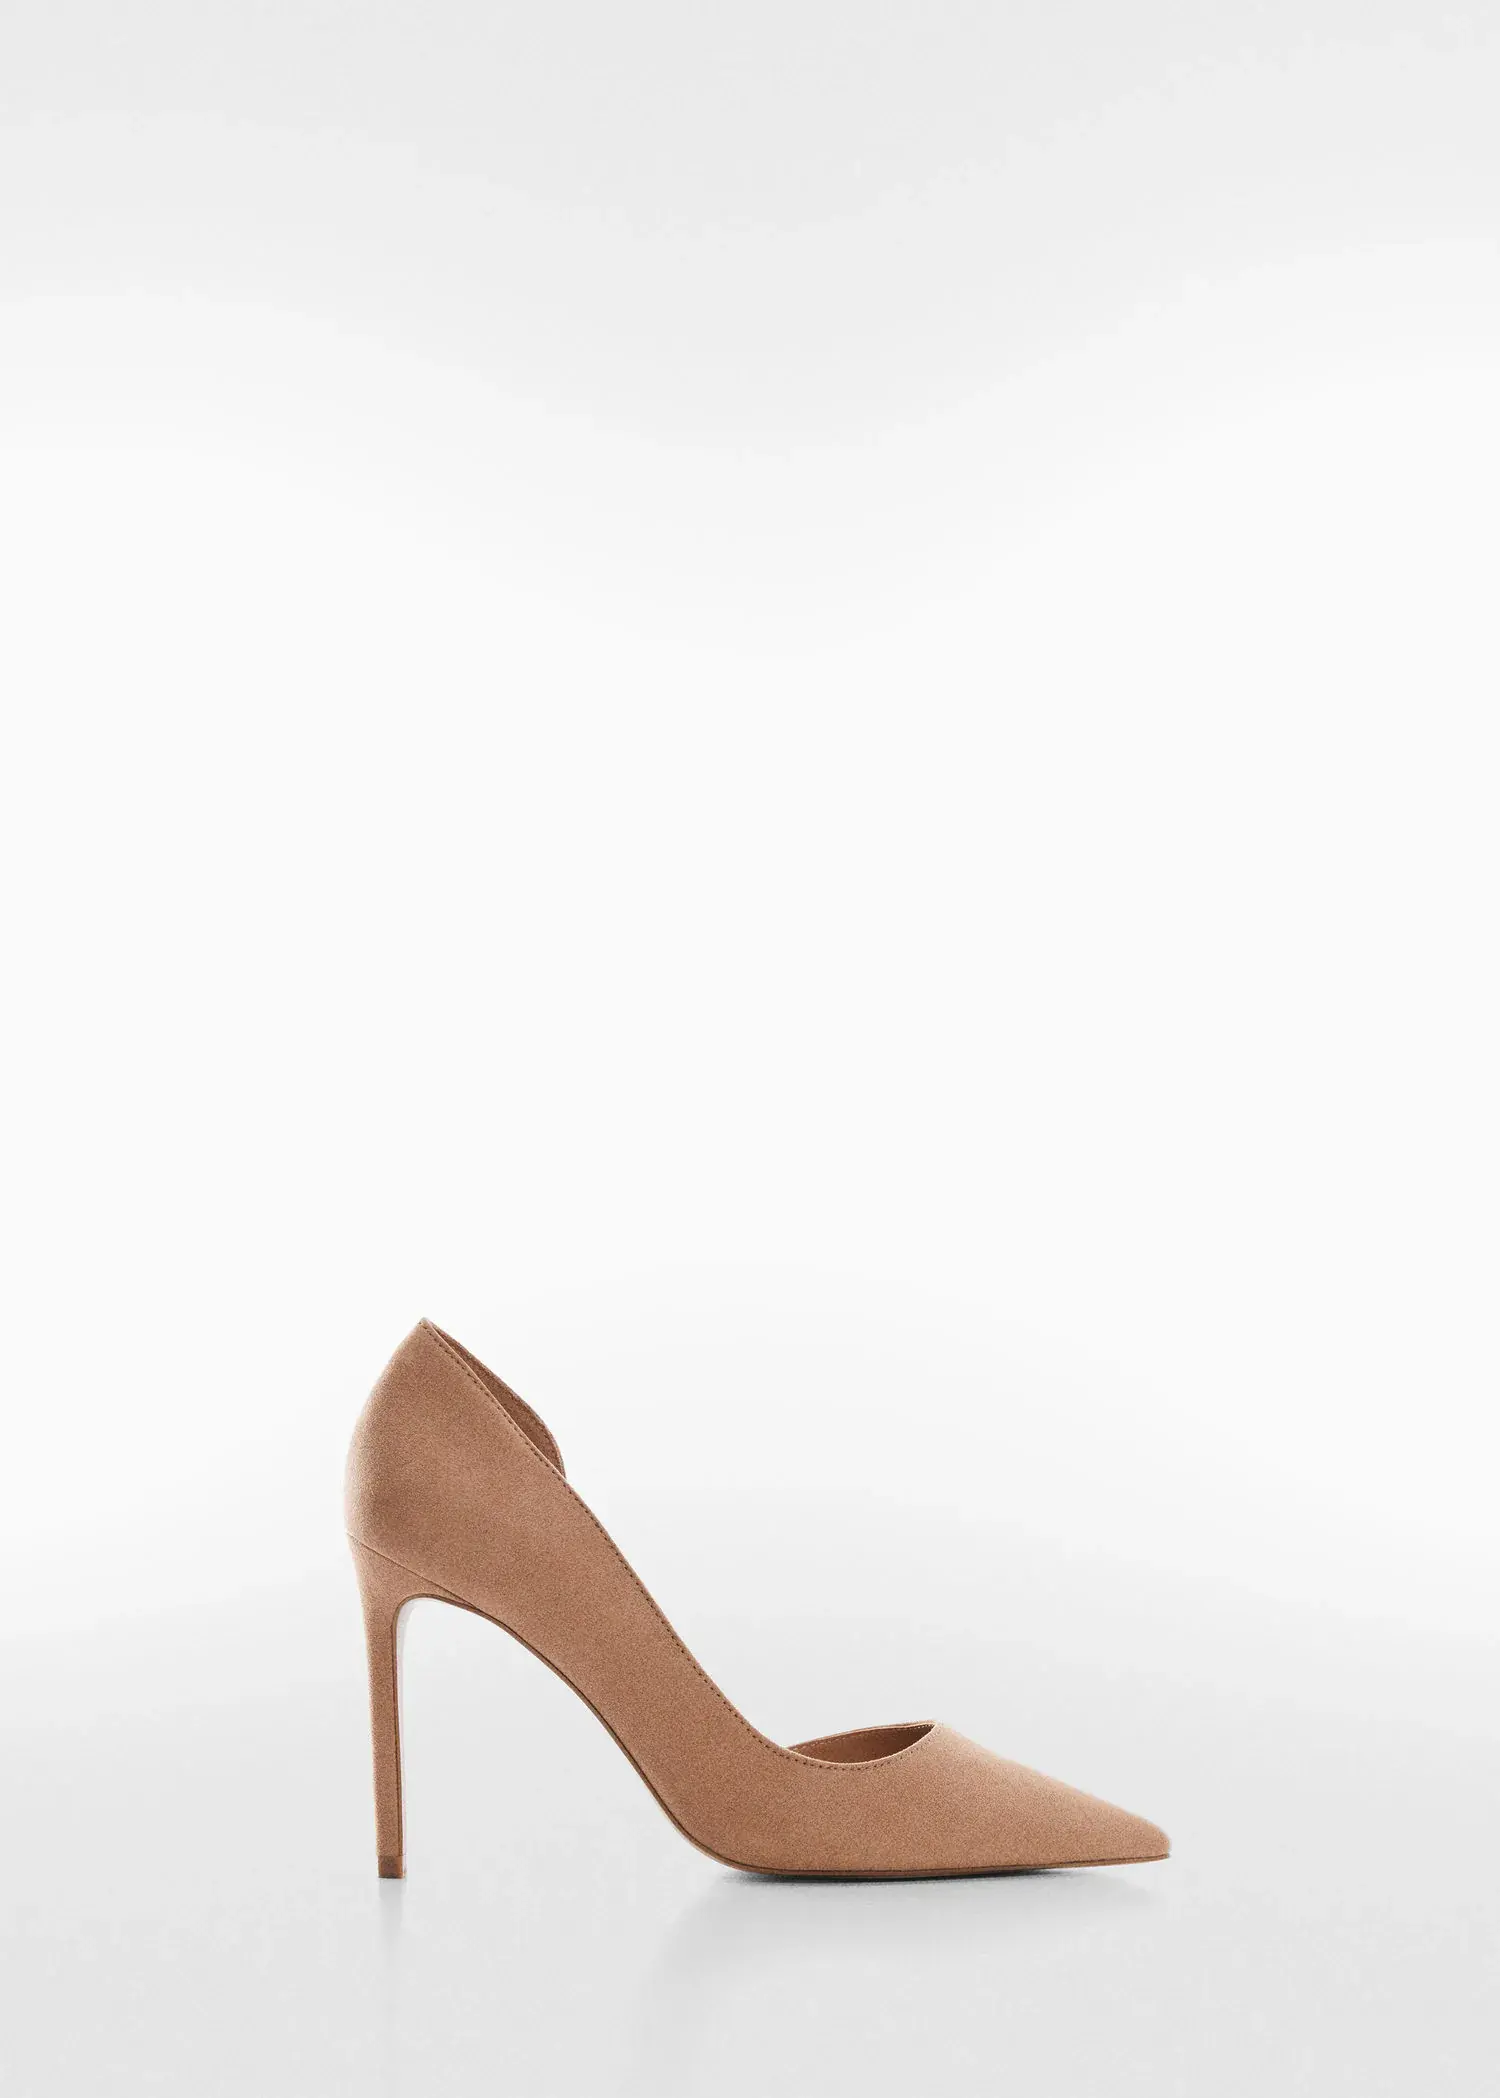 Mango Asymmetrical heeled shoes. a close up of a pair of shoes on a white background 